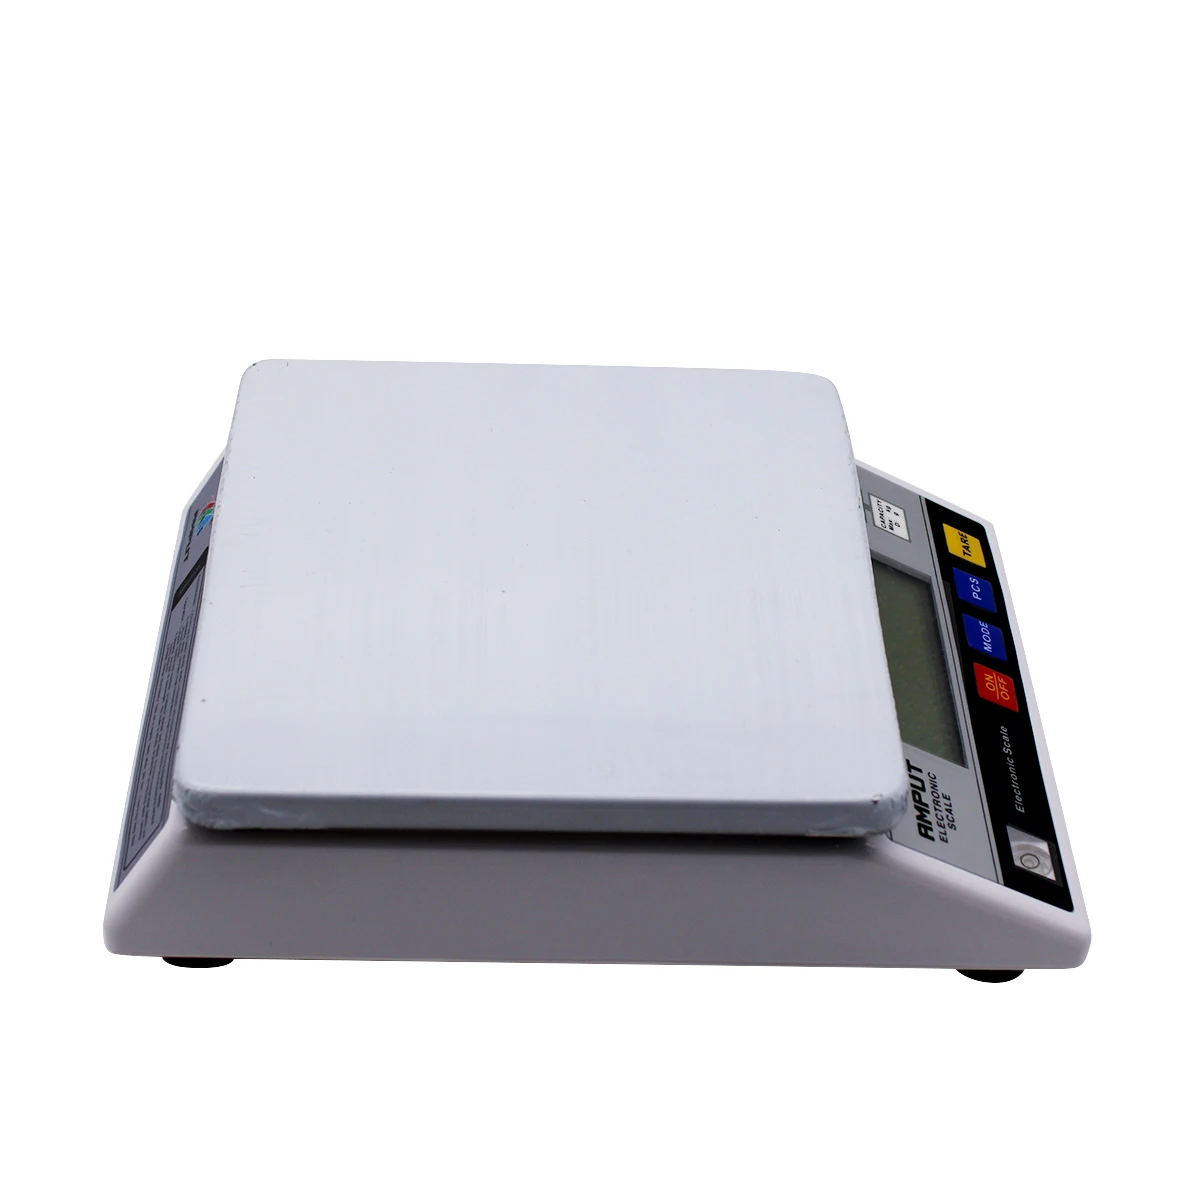 https://ae01.alicdn.com/kf/H76240d4722034a8a89d0e45f7e121e61T/10kg-x-0-1g-Digital-Precision-Electronic-Laboratory-Balance-Industrial-Weighing-Scale-Balance-w-Counting-Table.jpg